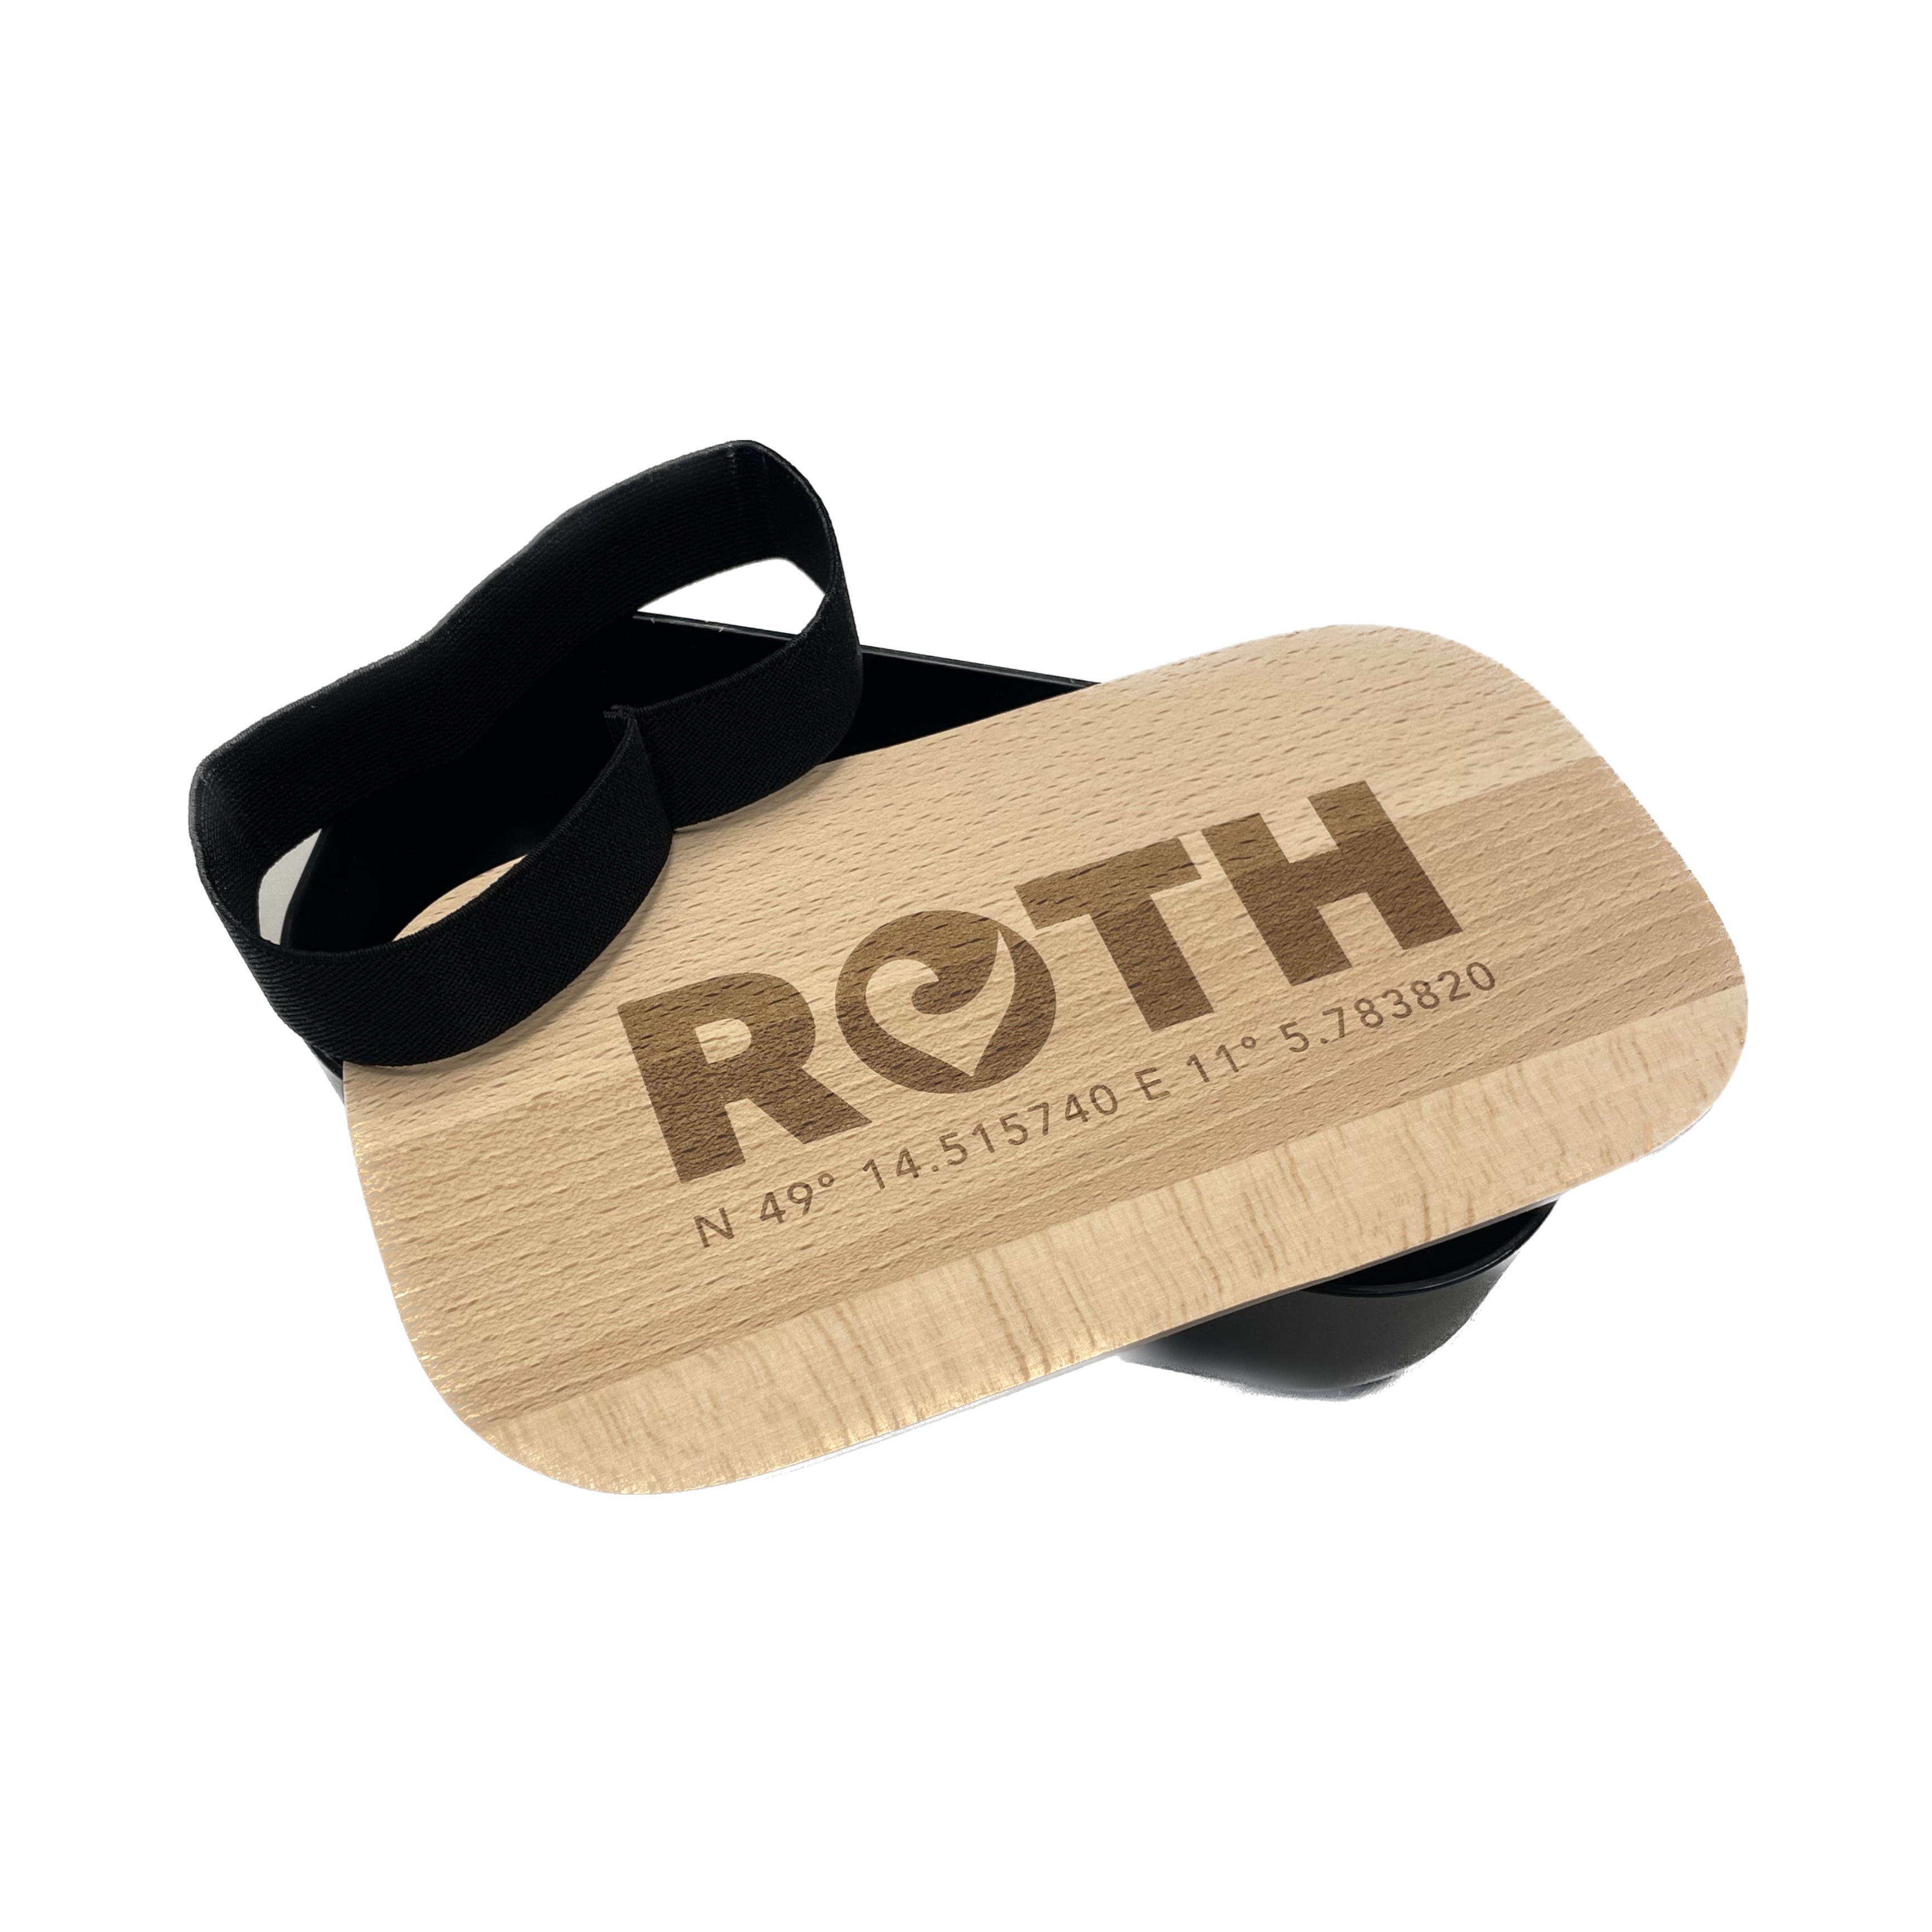 Lunch box ROTH reusable